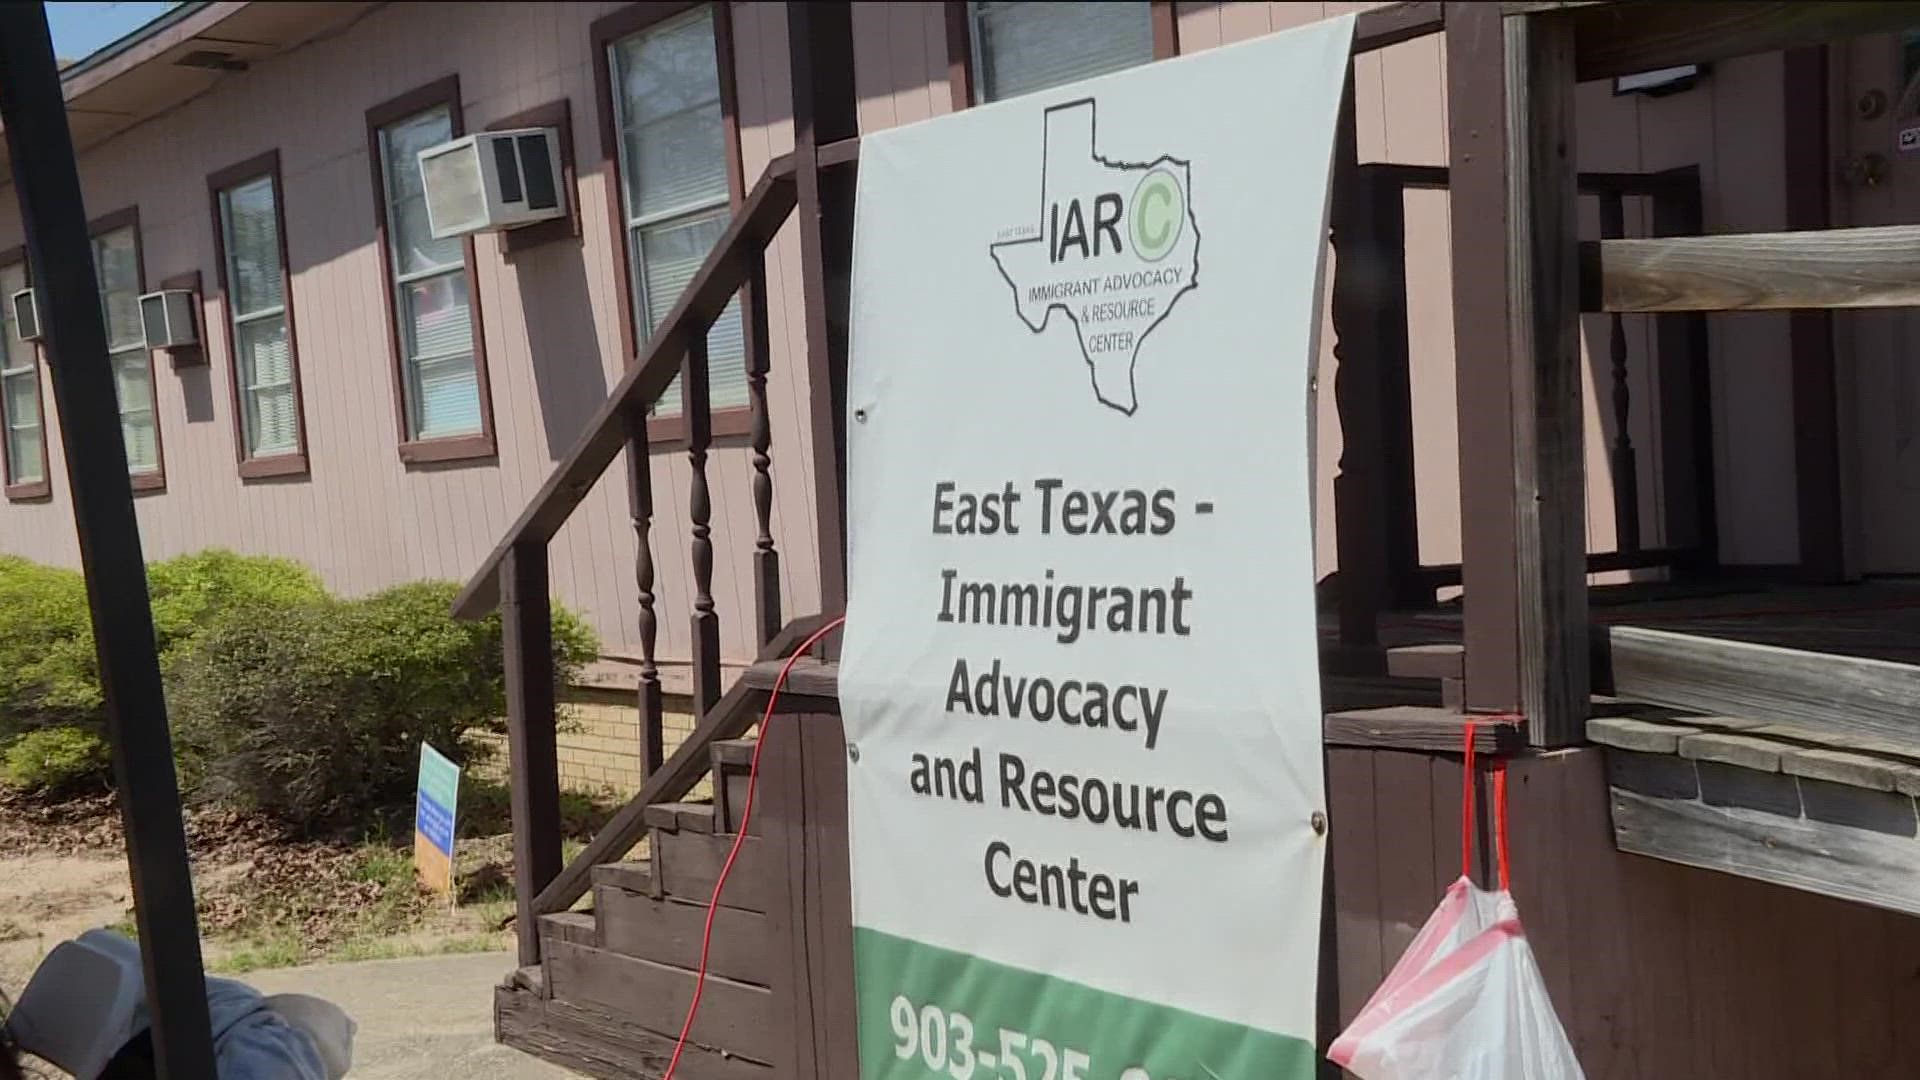 "The best thing for Congress to do would be for some solid immigration reform," said Karen Jones, East Texas Immigrant Advocacy and Resource Center.